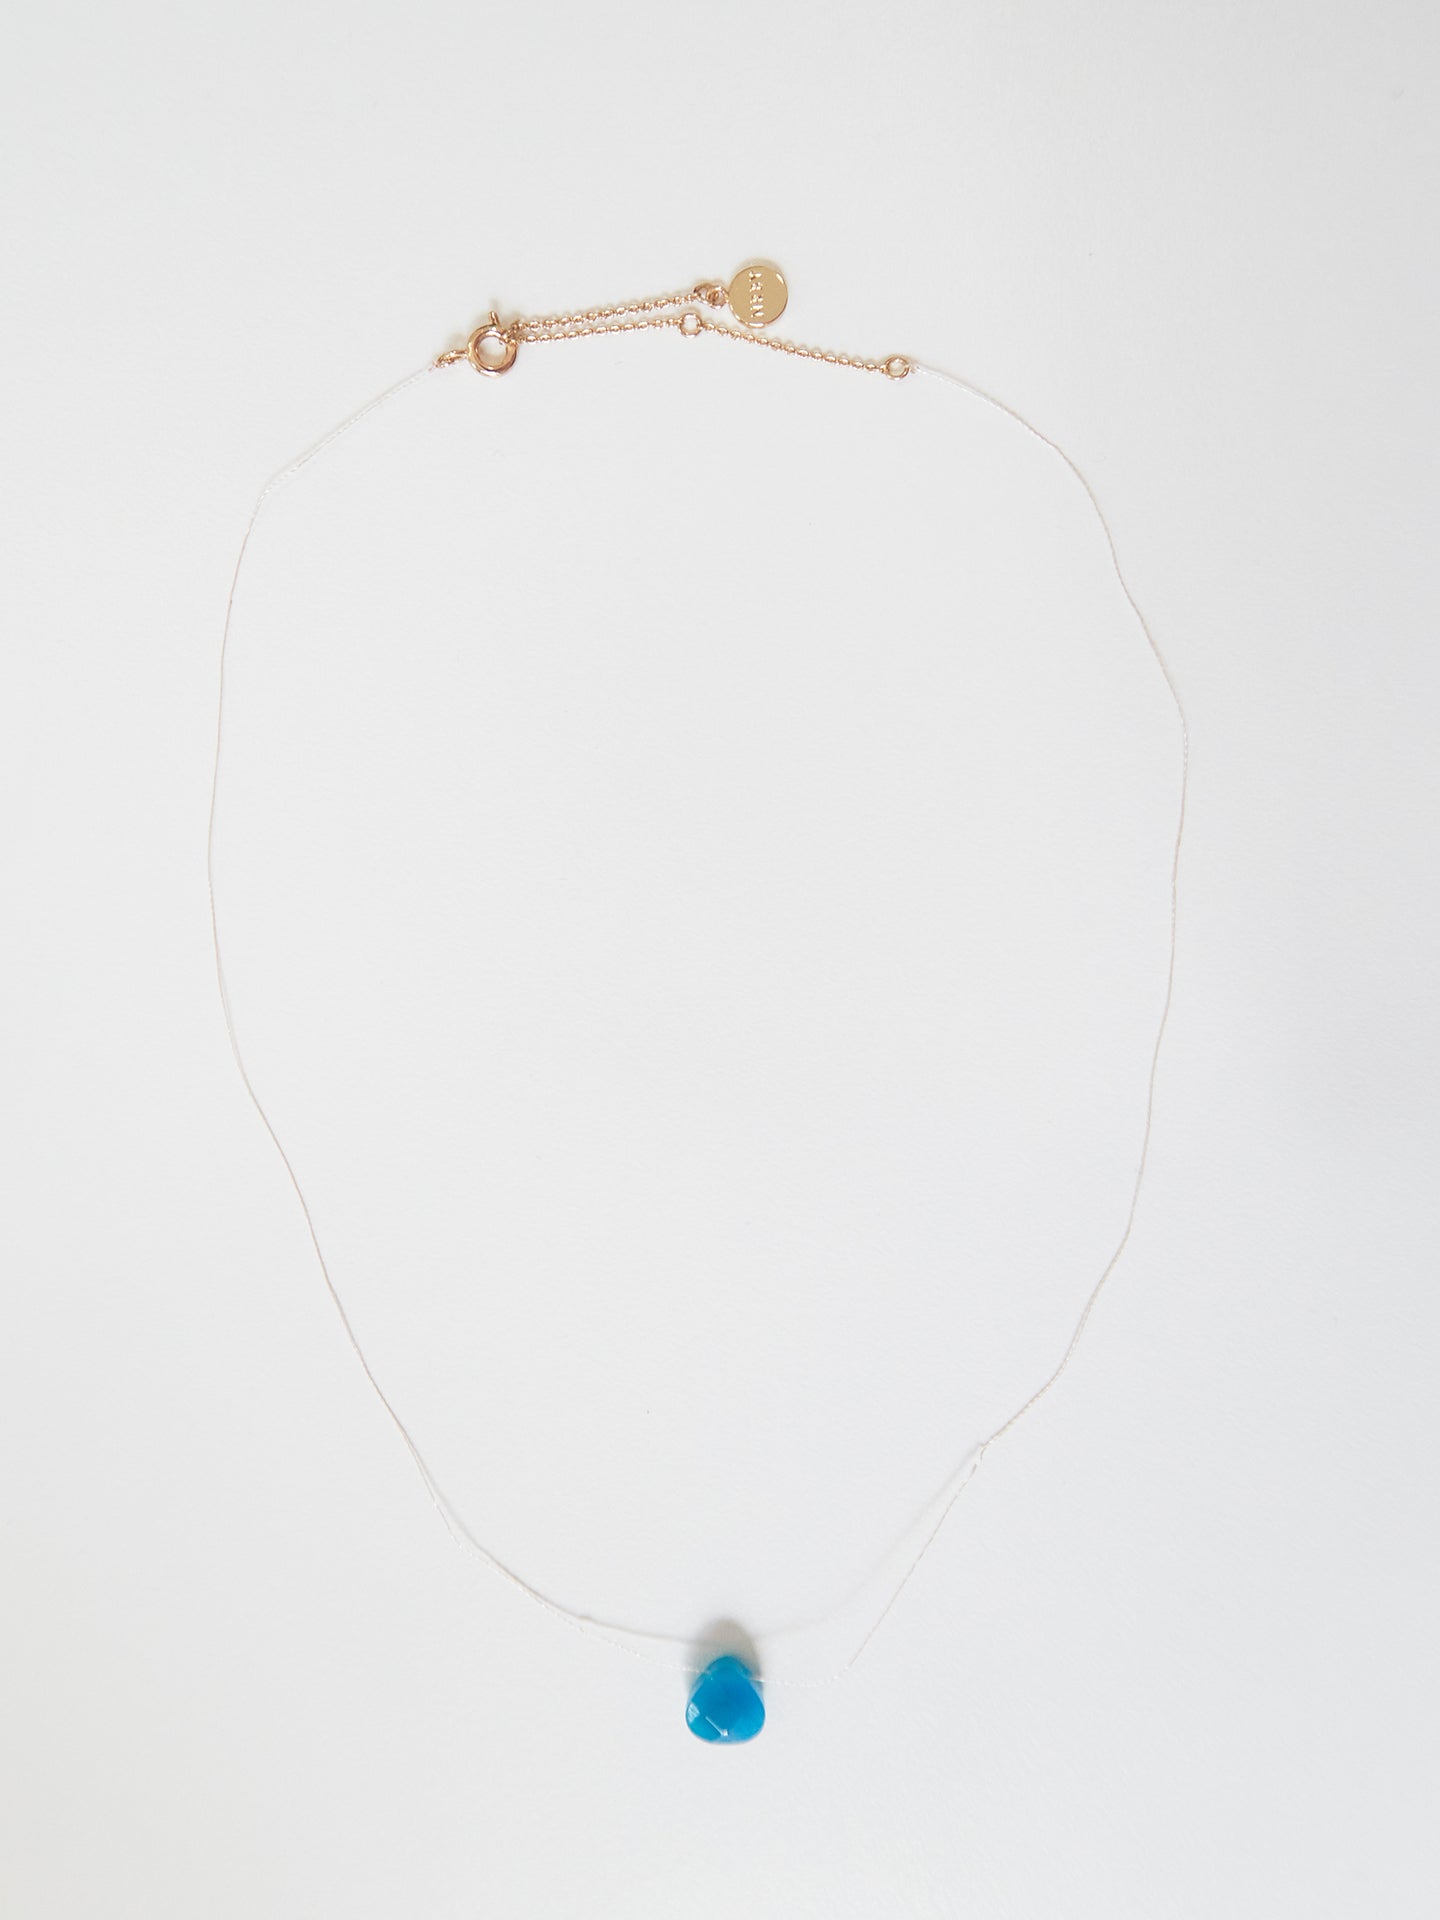 Silk thread necklace with turq apatite